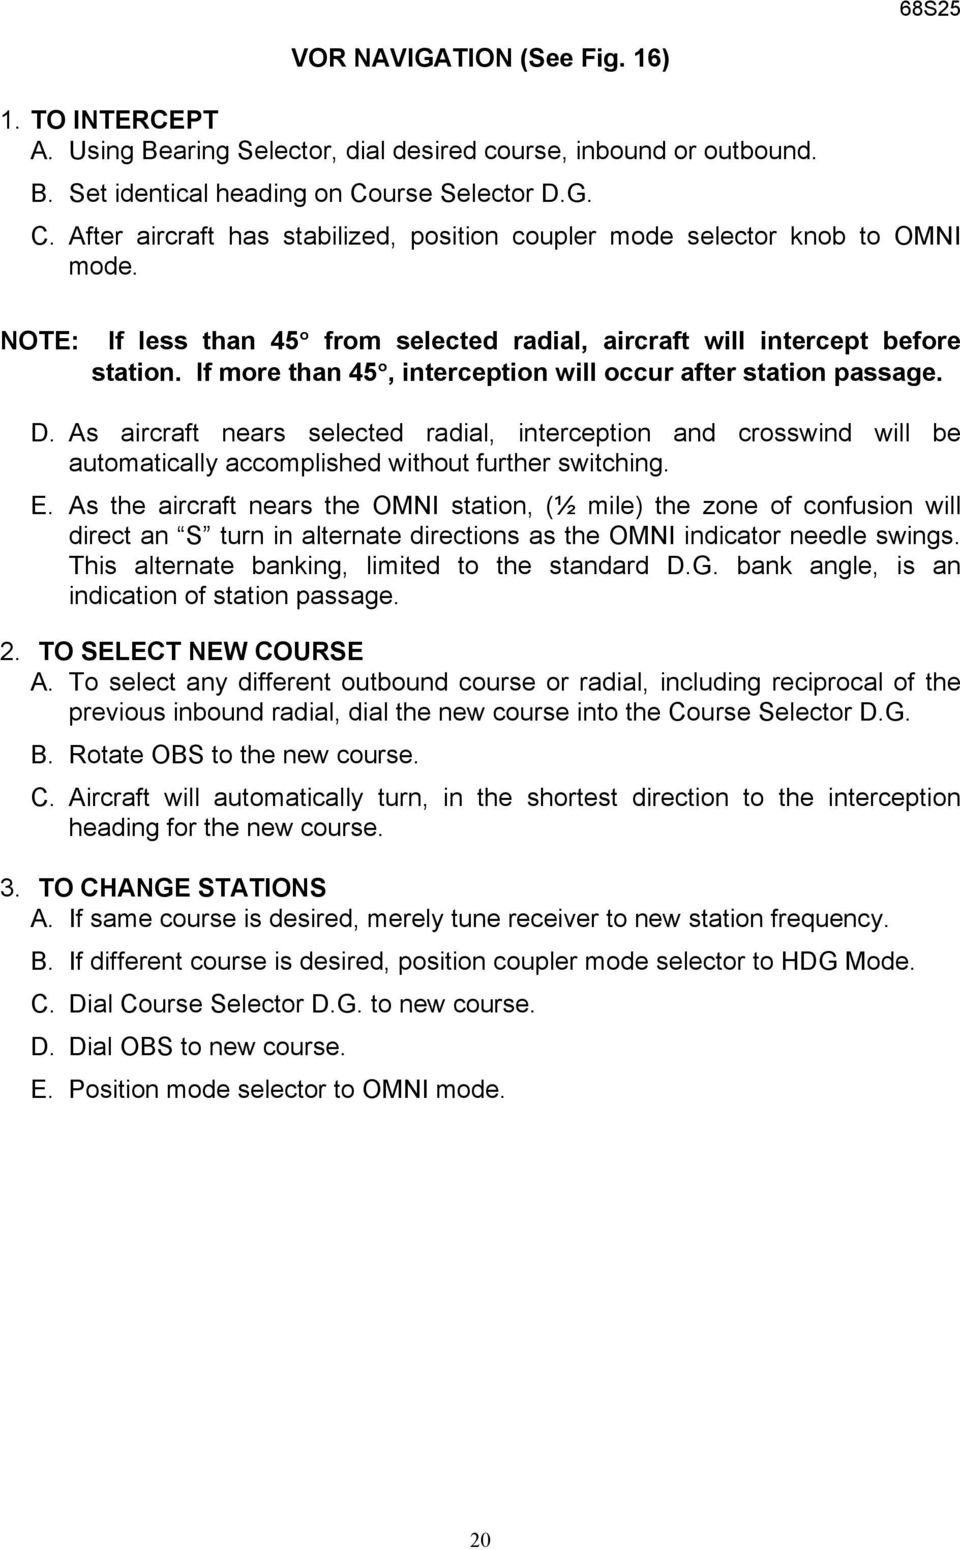 If more than 45, interception will occur after station passage. D. As aircraft nears selected radial, interception and crosswind will be automatically accomplished without further switching. E.